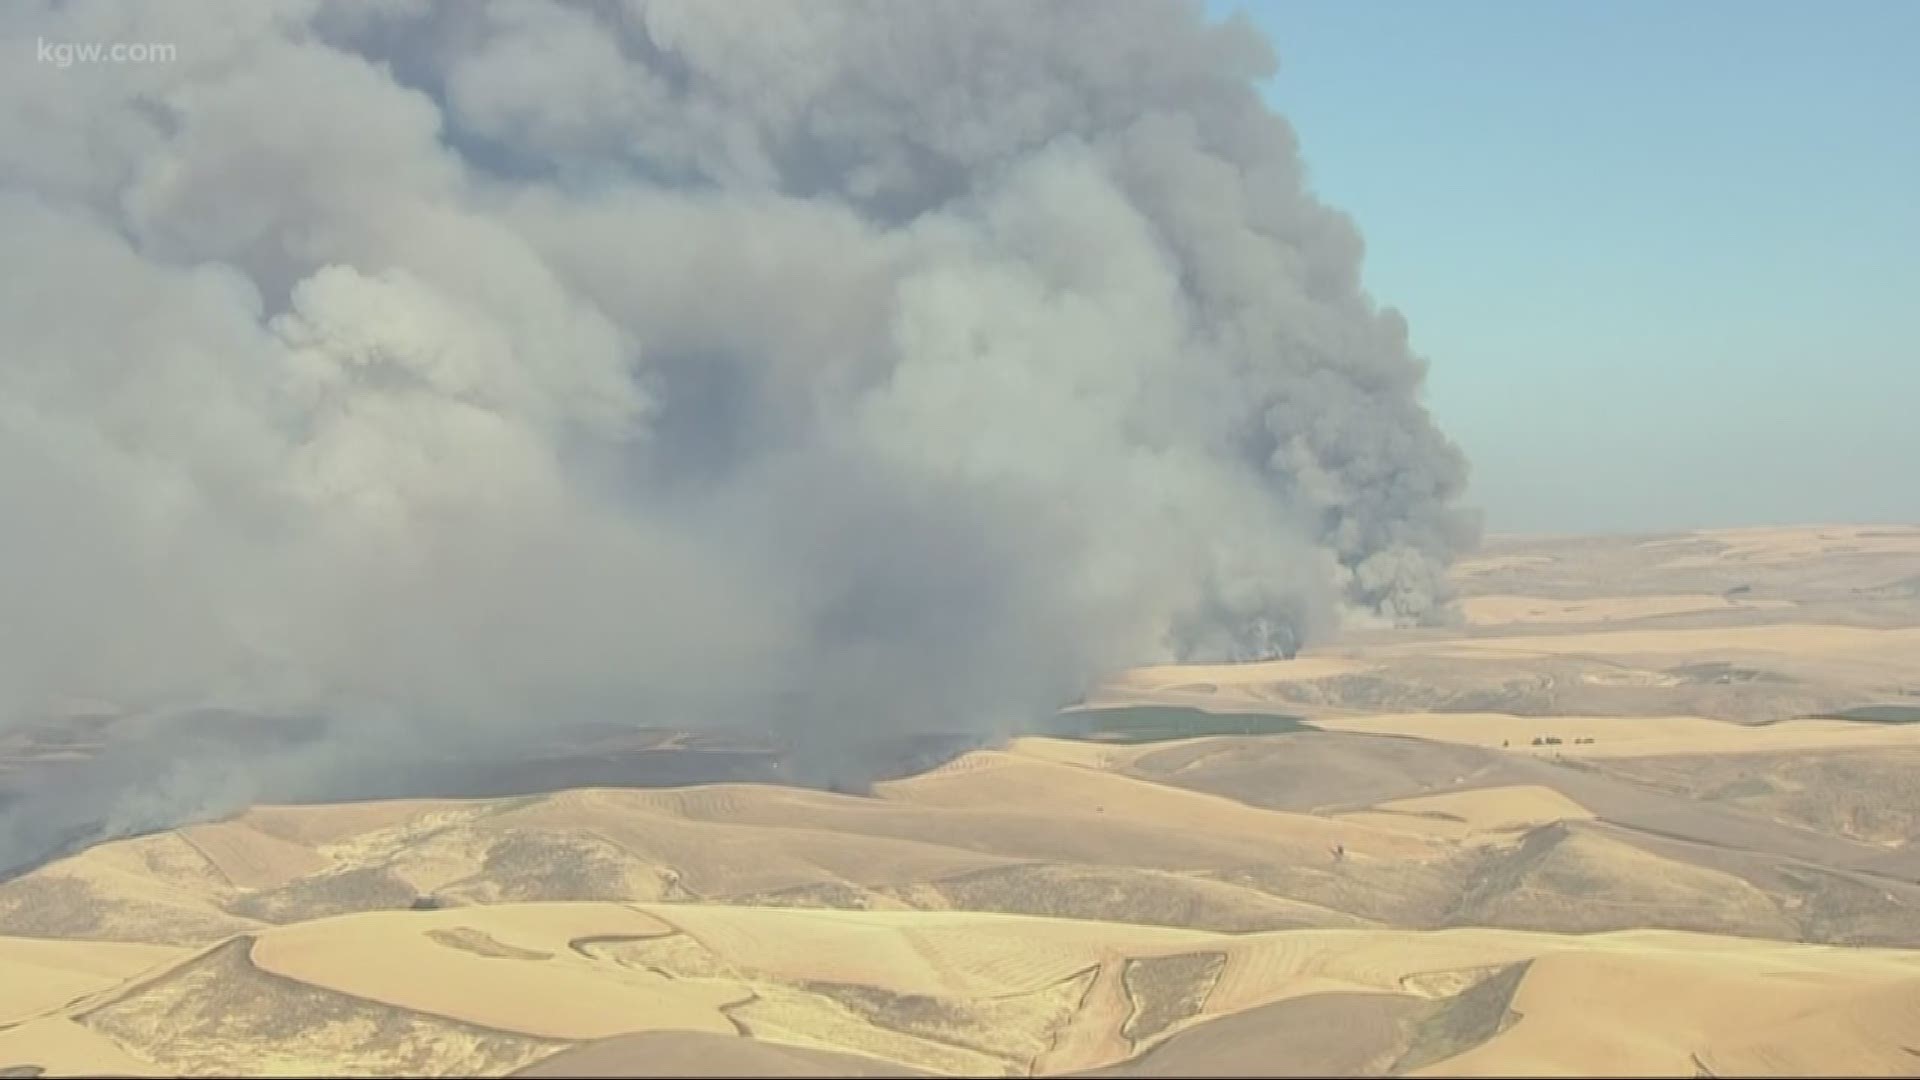 The Substation fire is now over 70,000 acres.